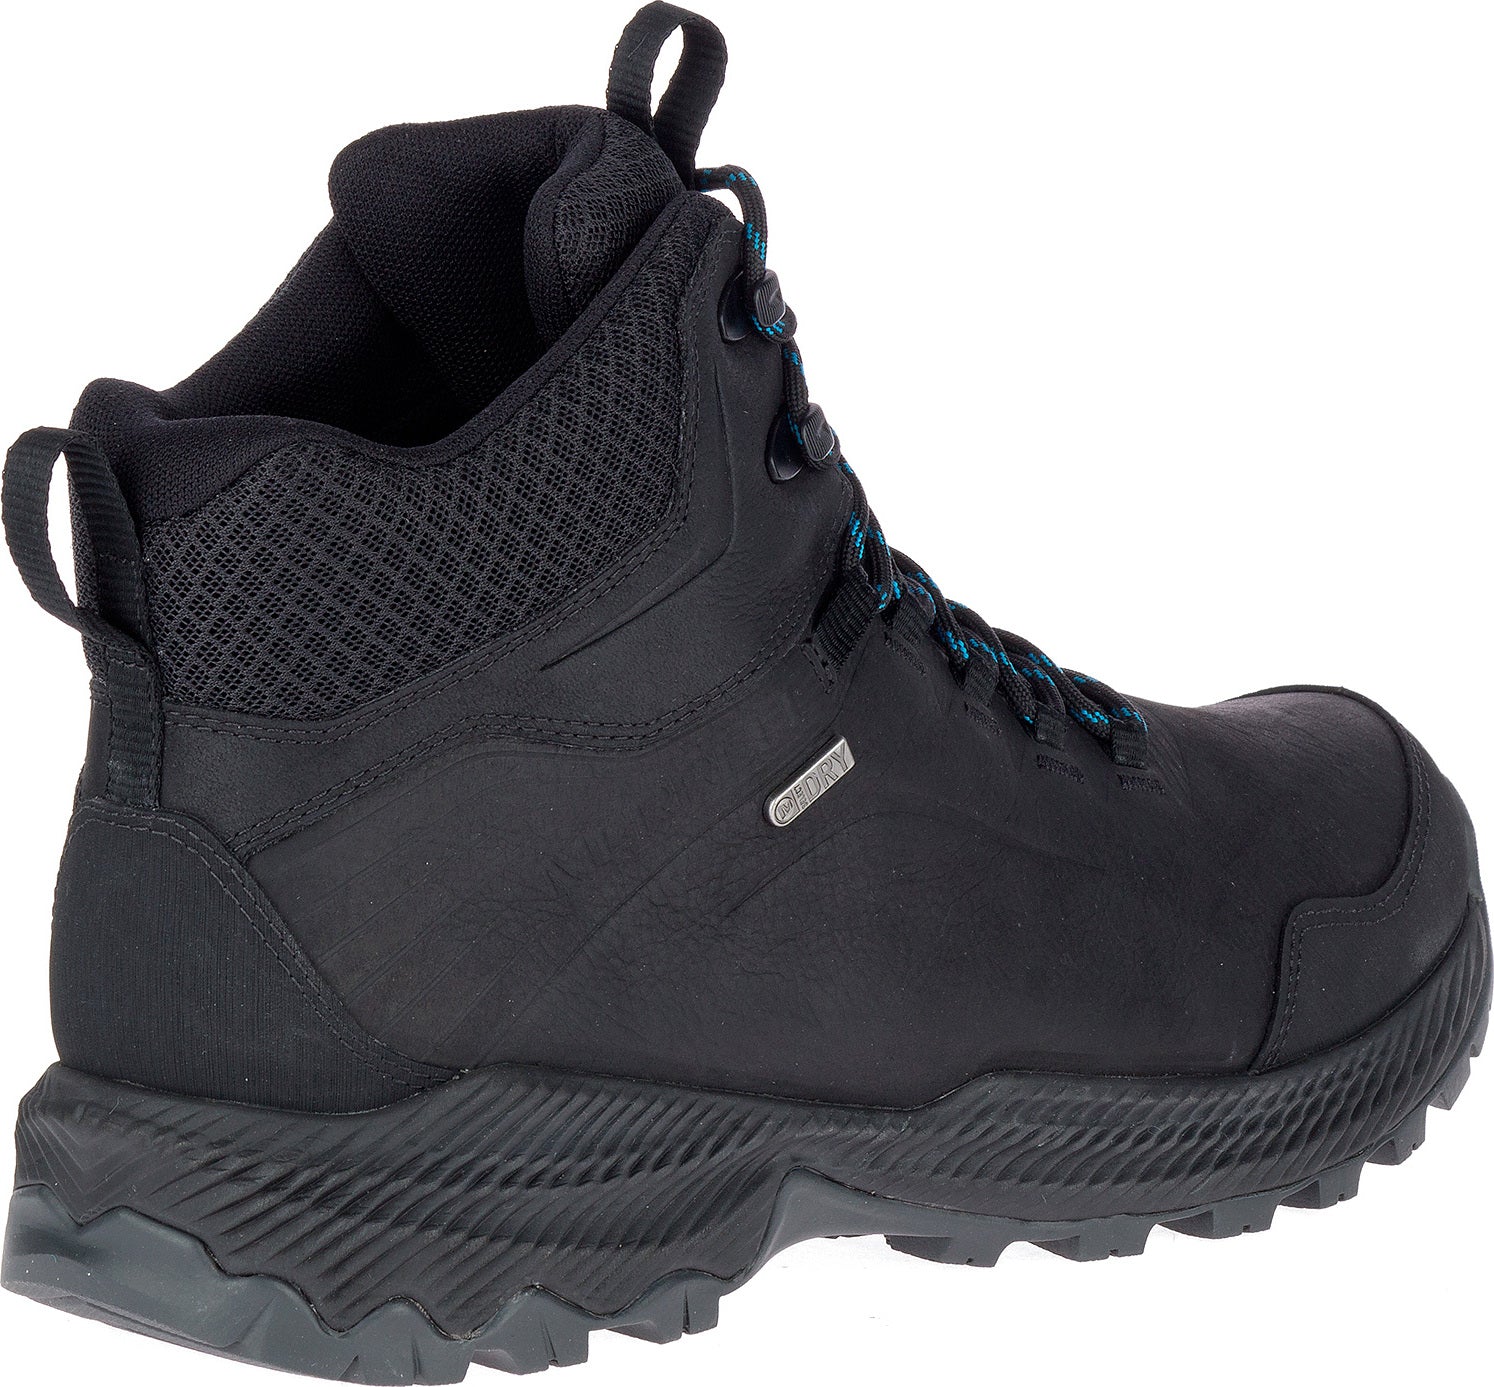 merrell men's forestbound mid wp hiking boots